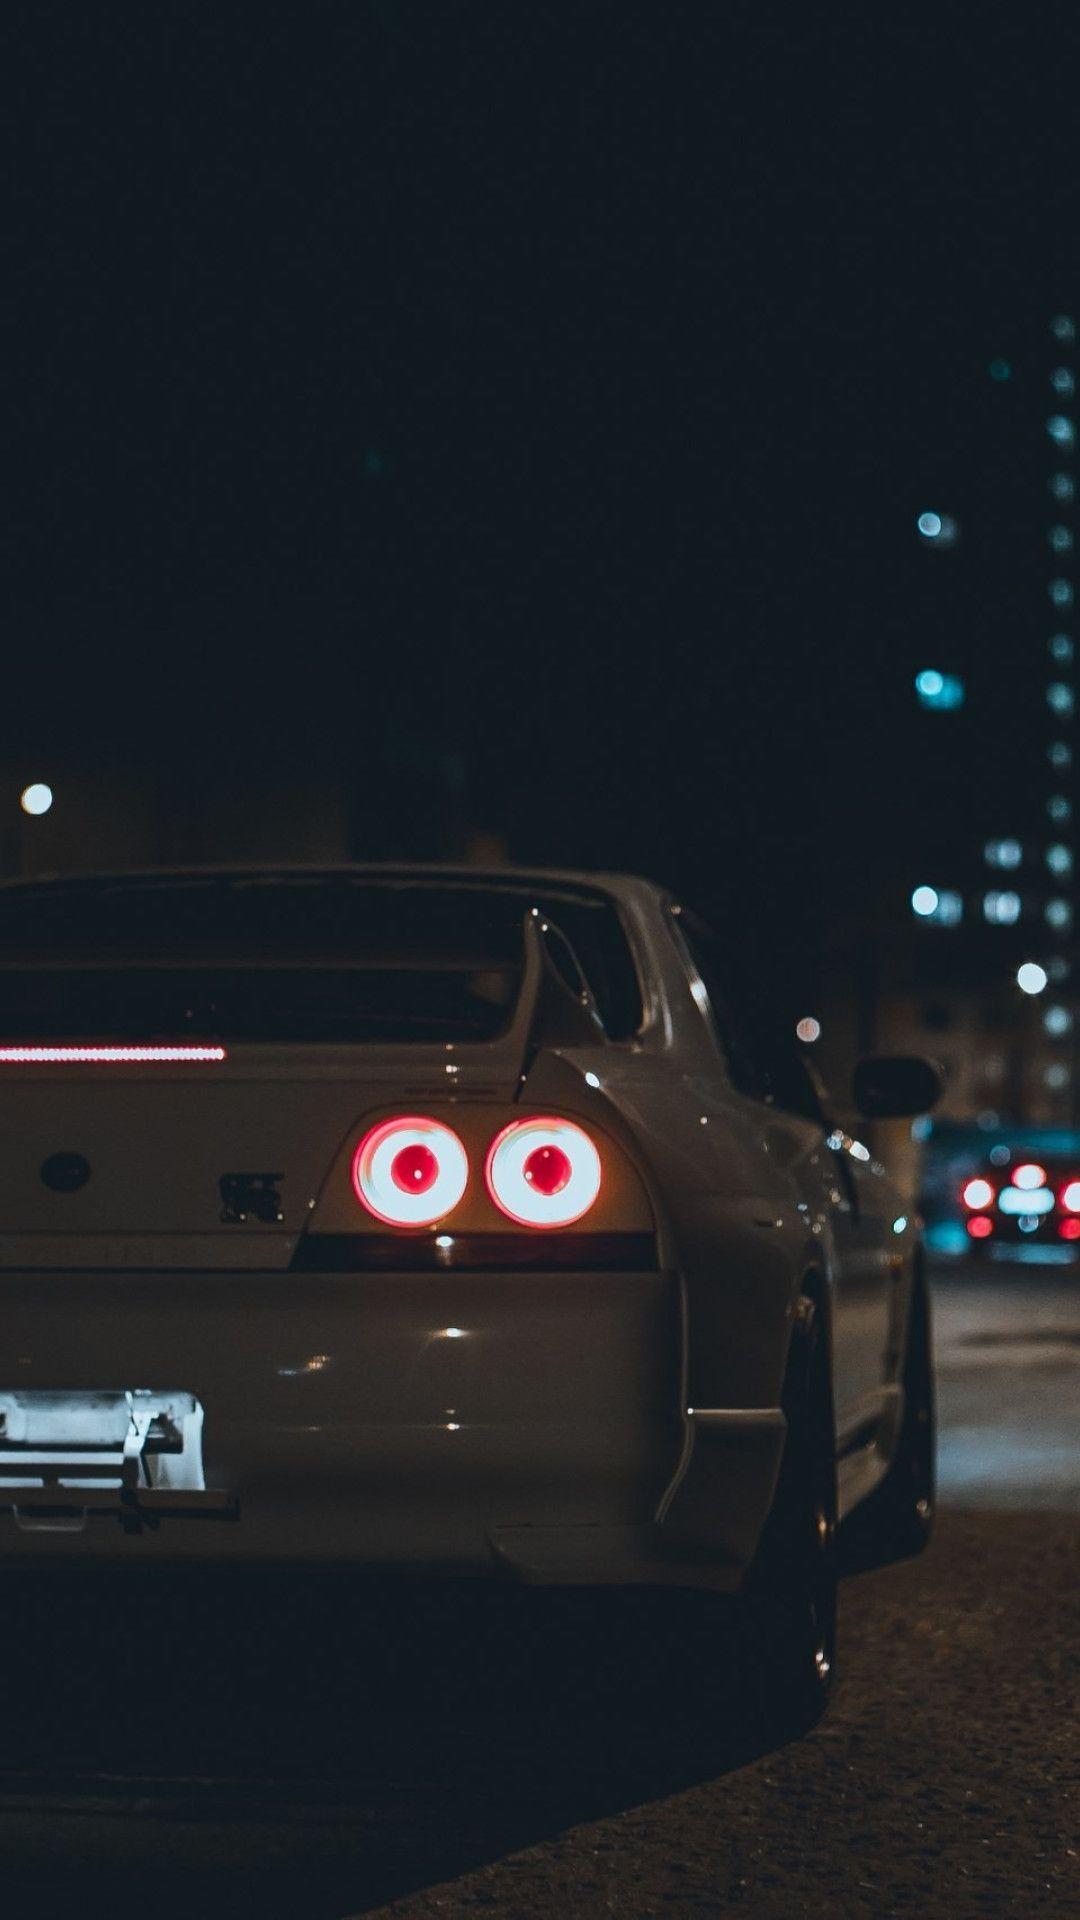 Gtr Iphone Wallpapers Top Free Gtr Iphone Backgrounds